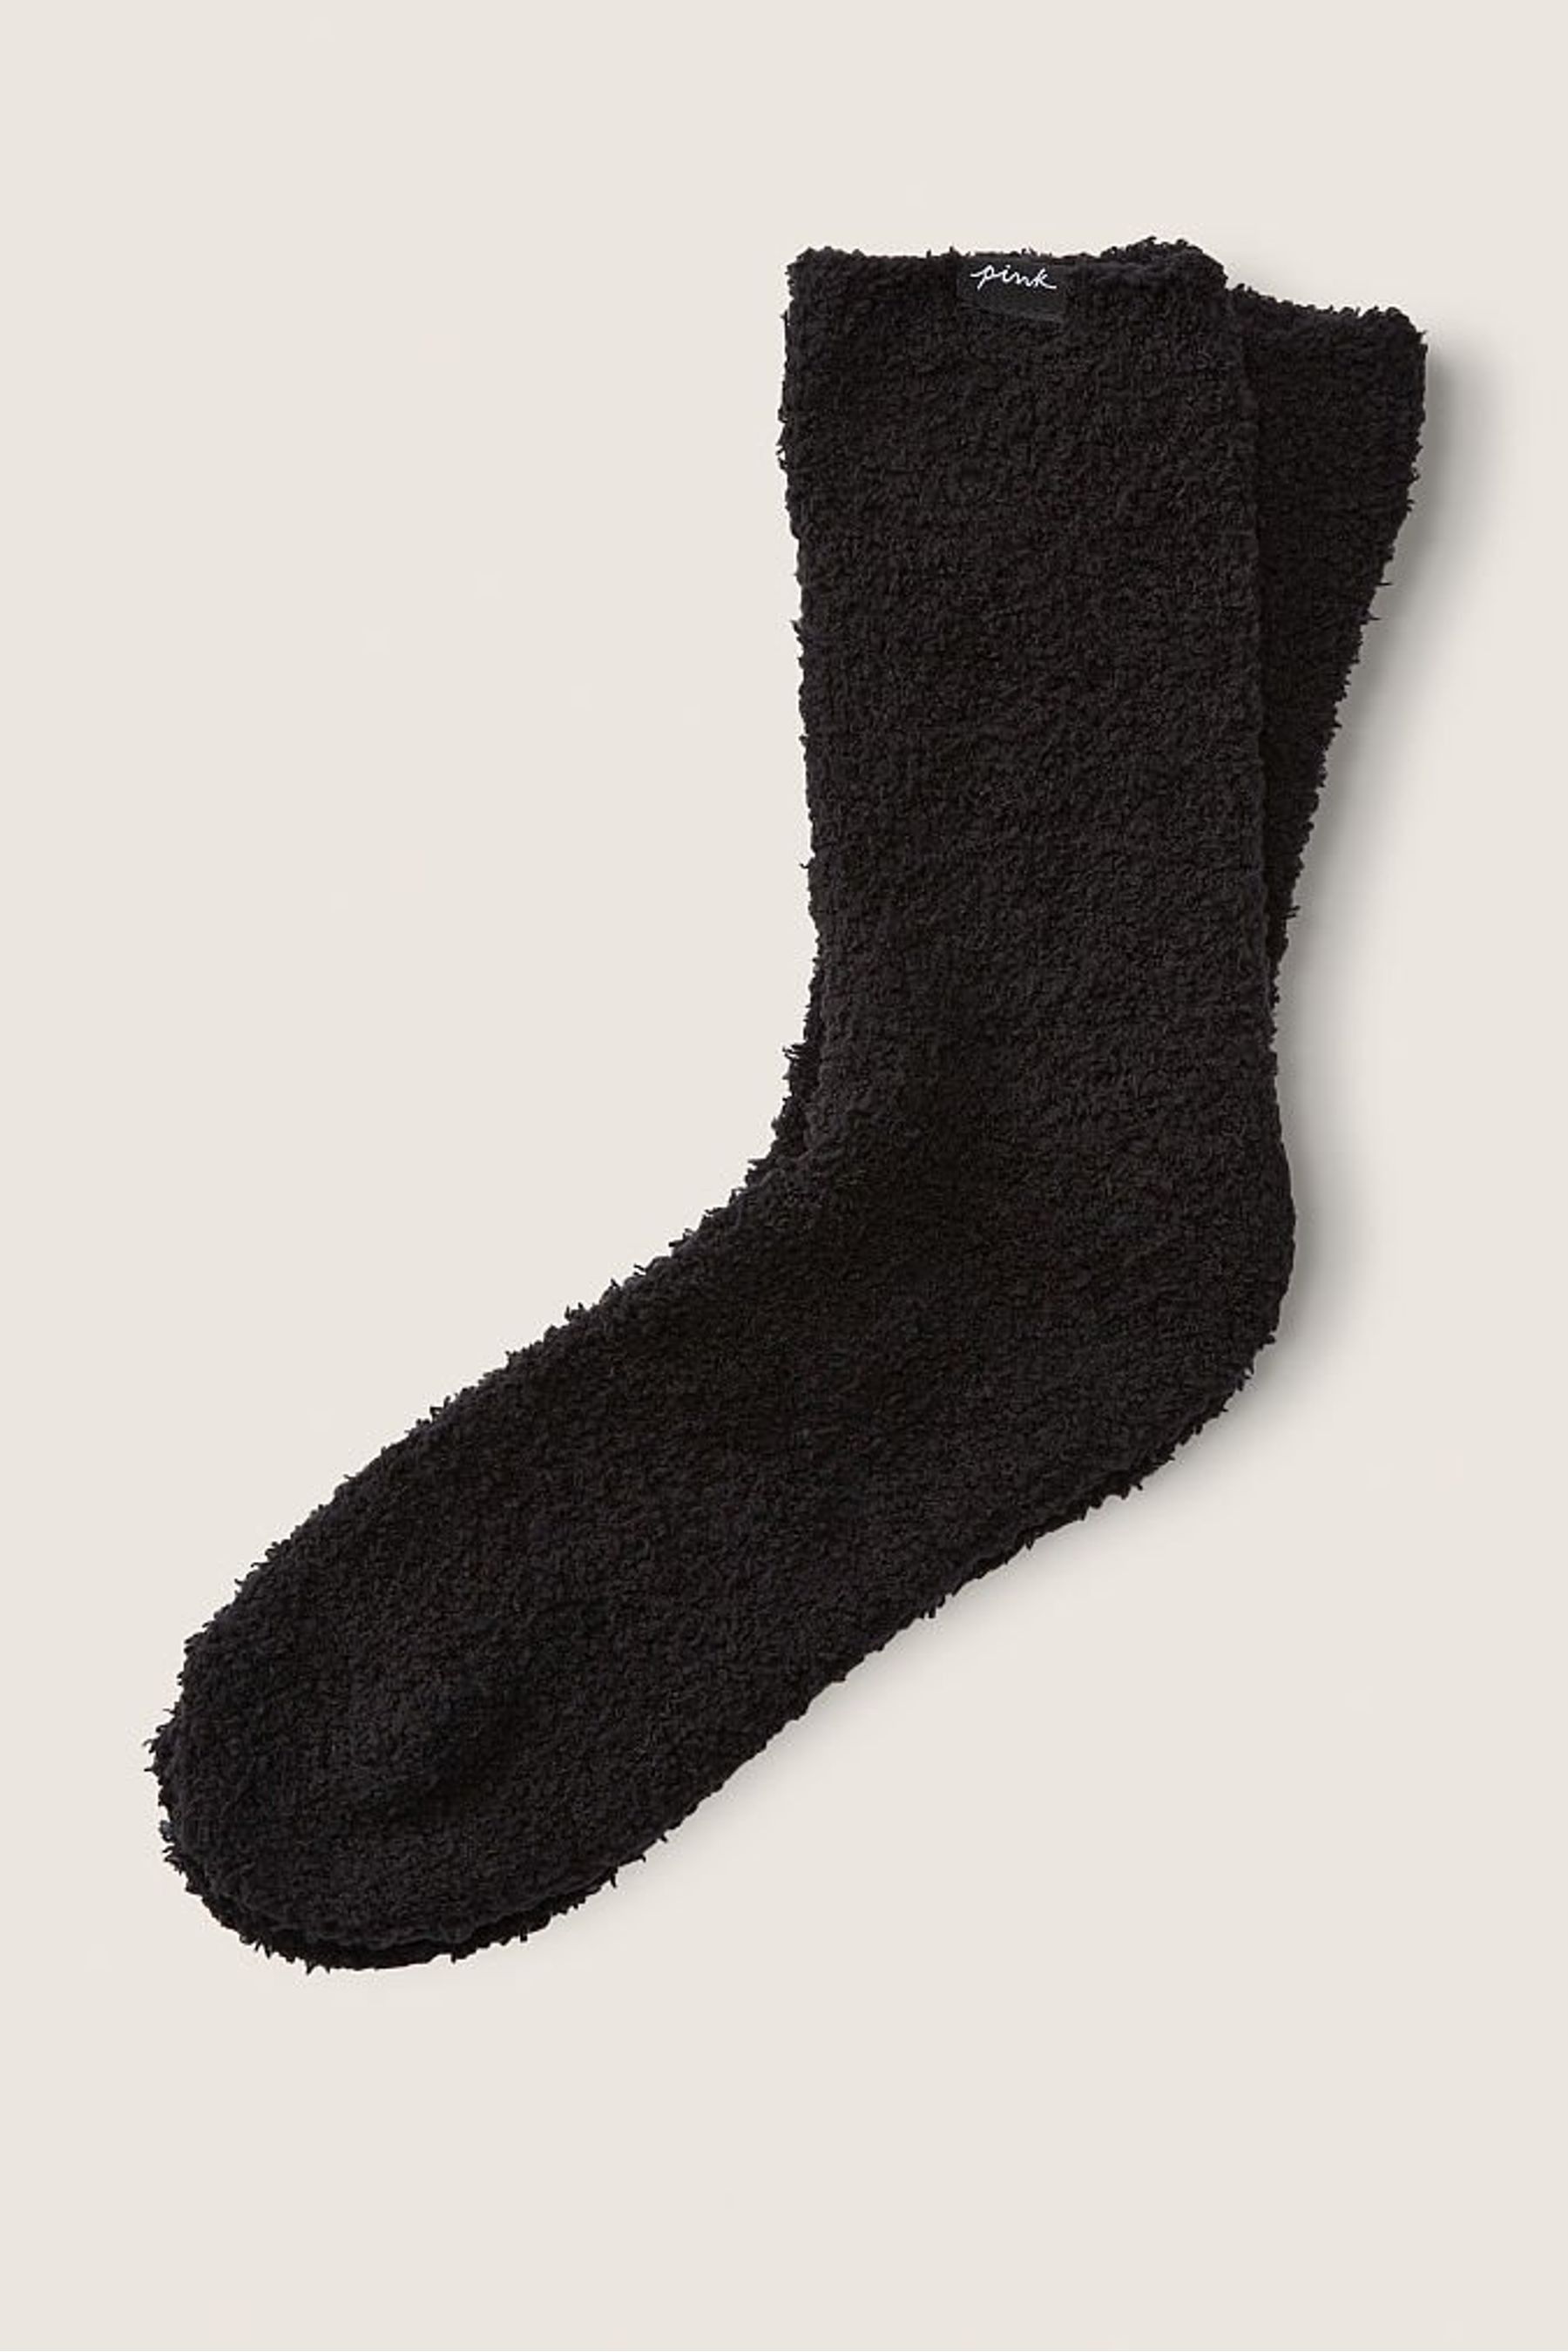 Buy Victoria's Secret PINK Pure Black Marshmallow Crew Sock from the ...